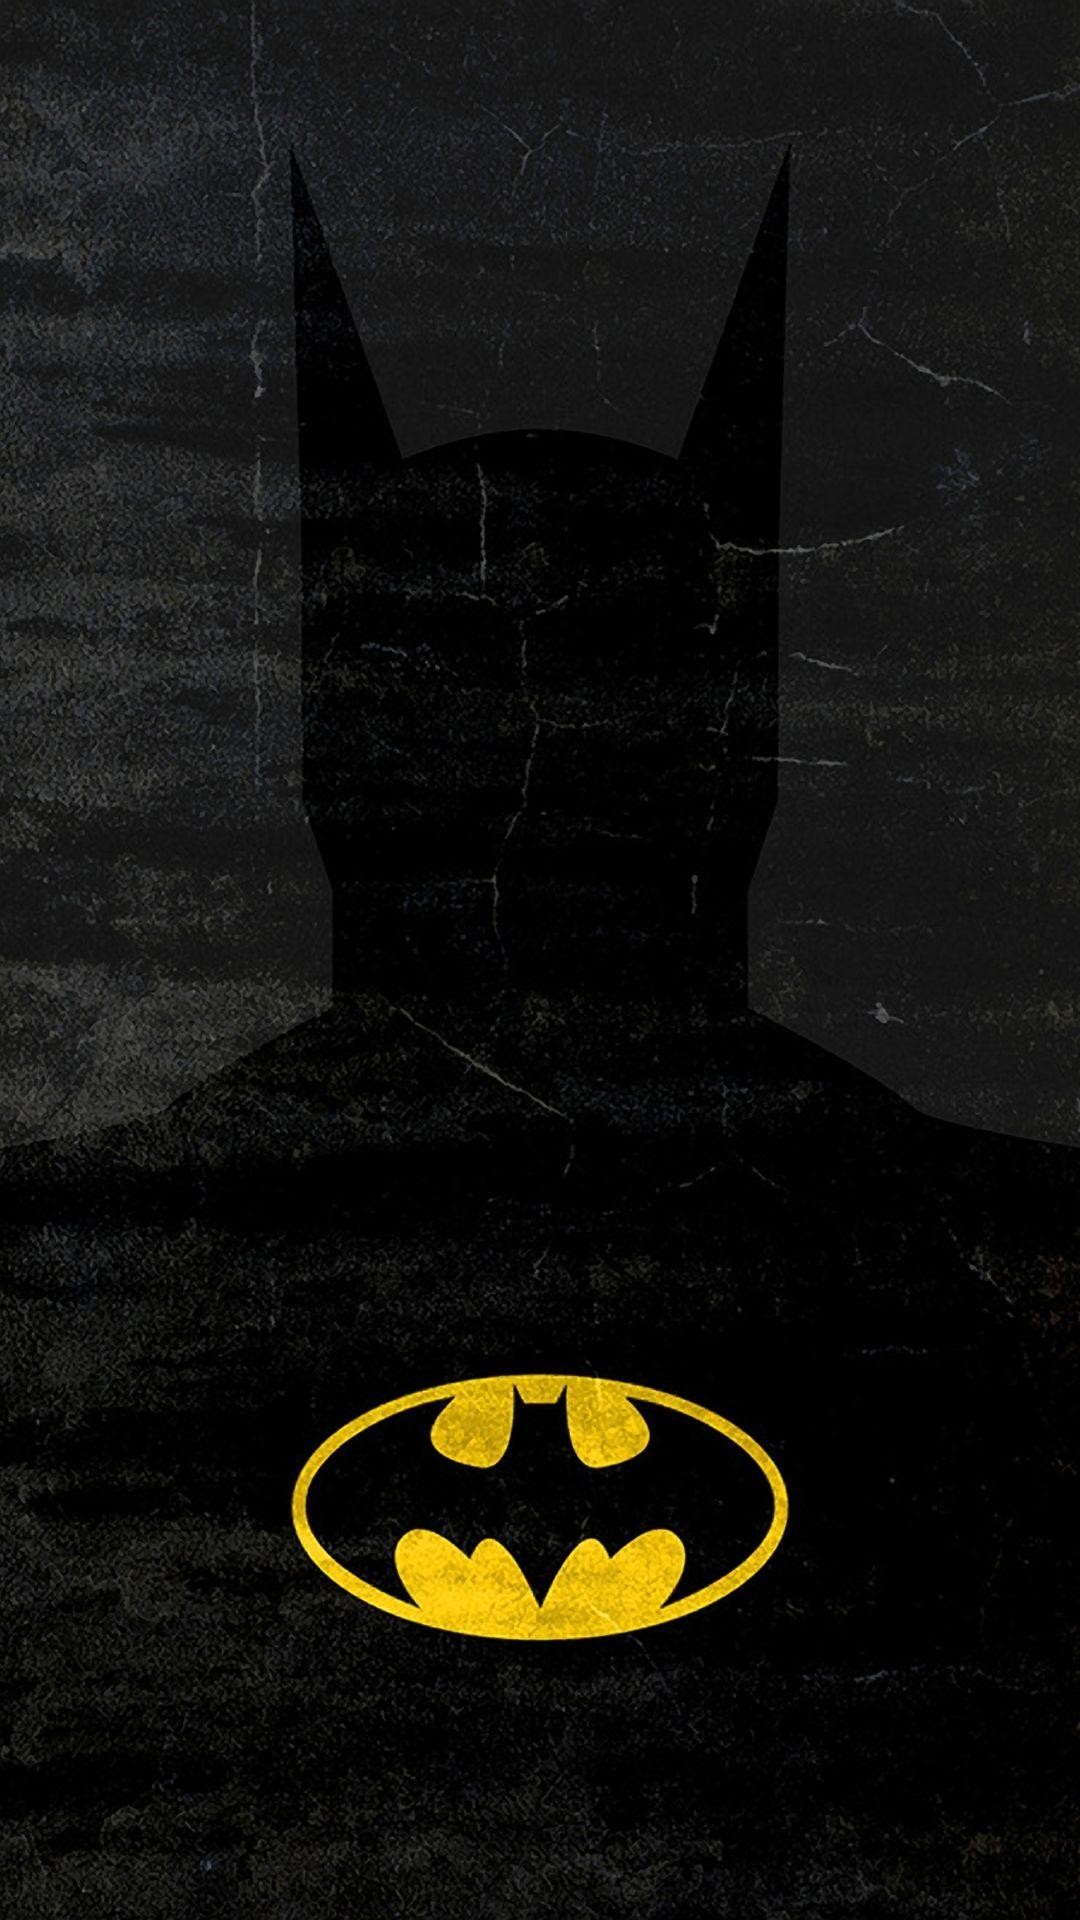 Samsung Galaxy S5 Wallpaper: Batman Mobile Android Background